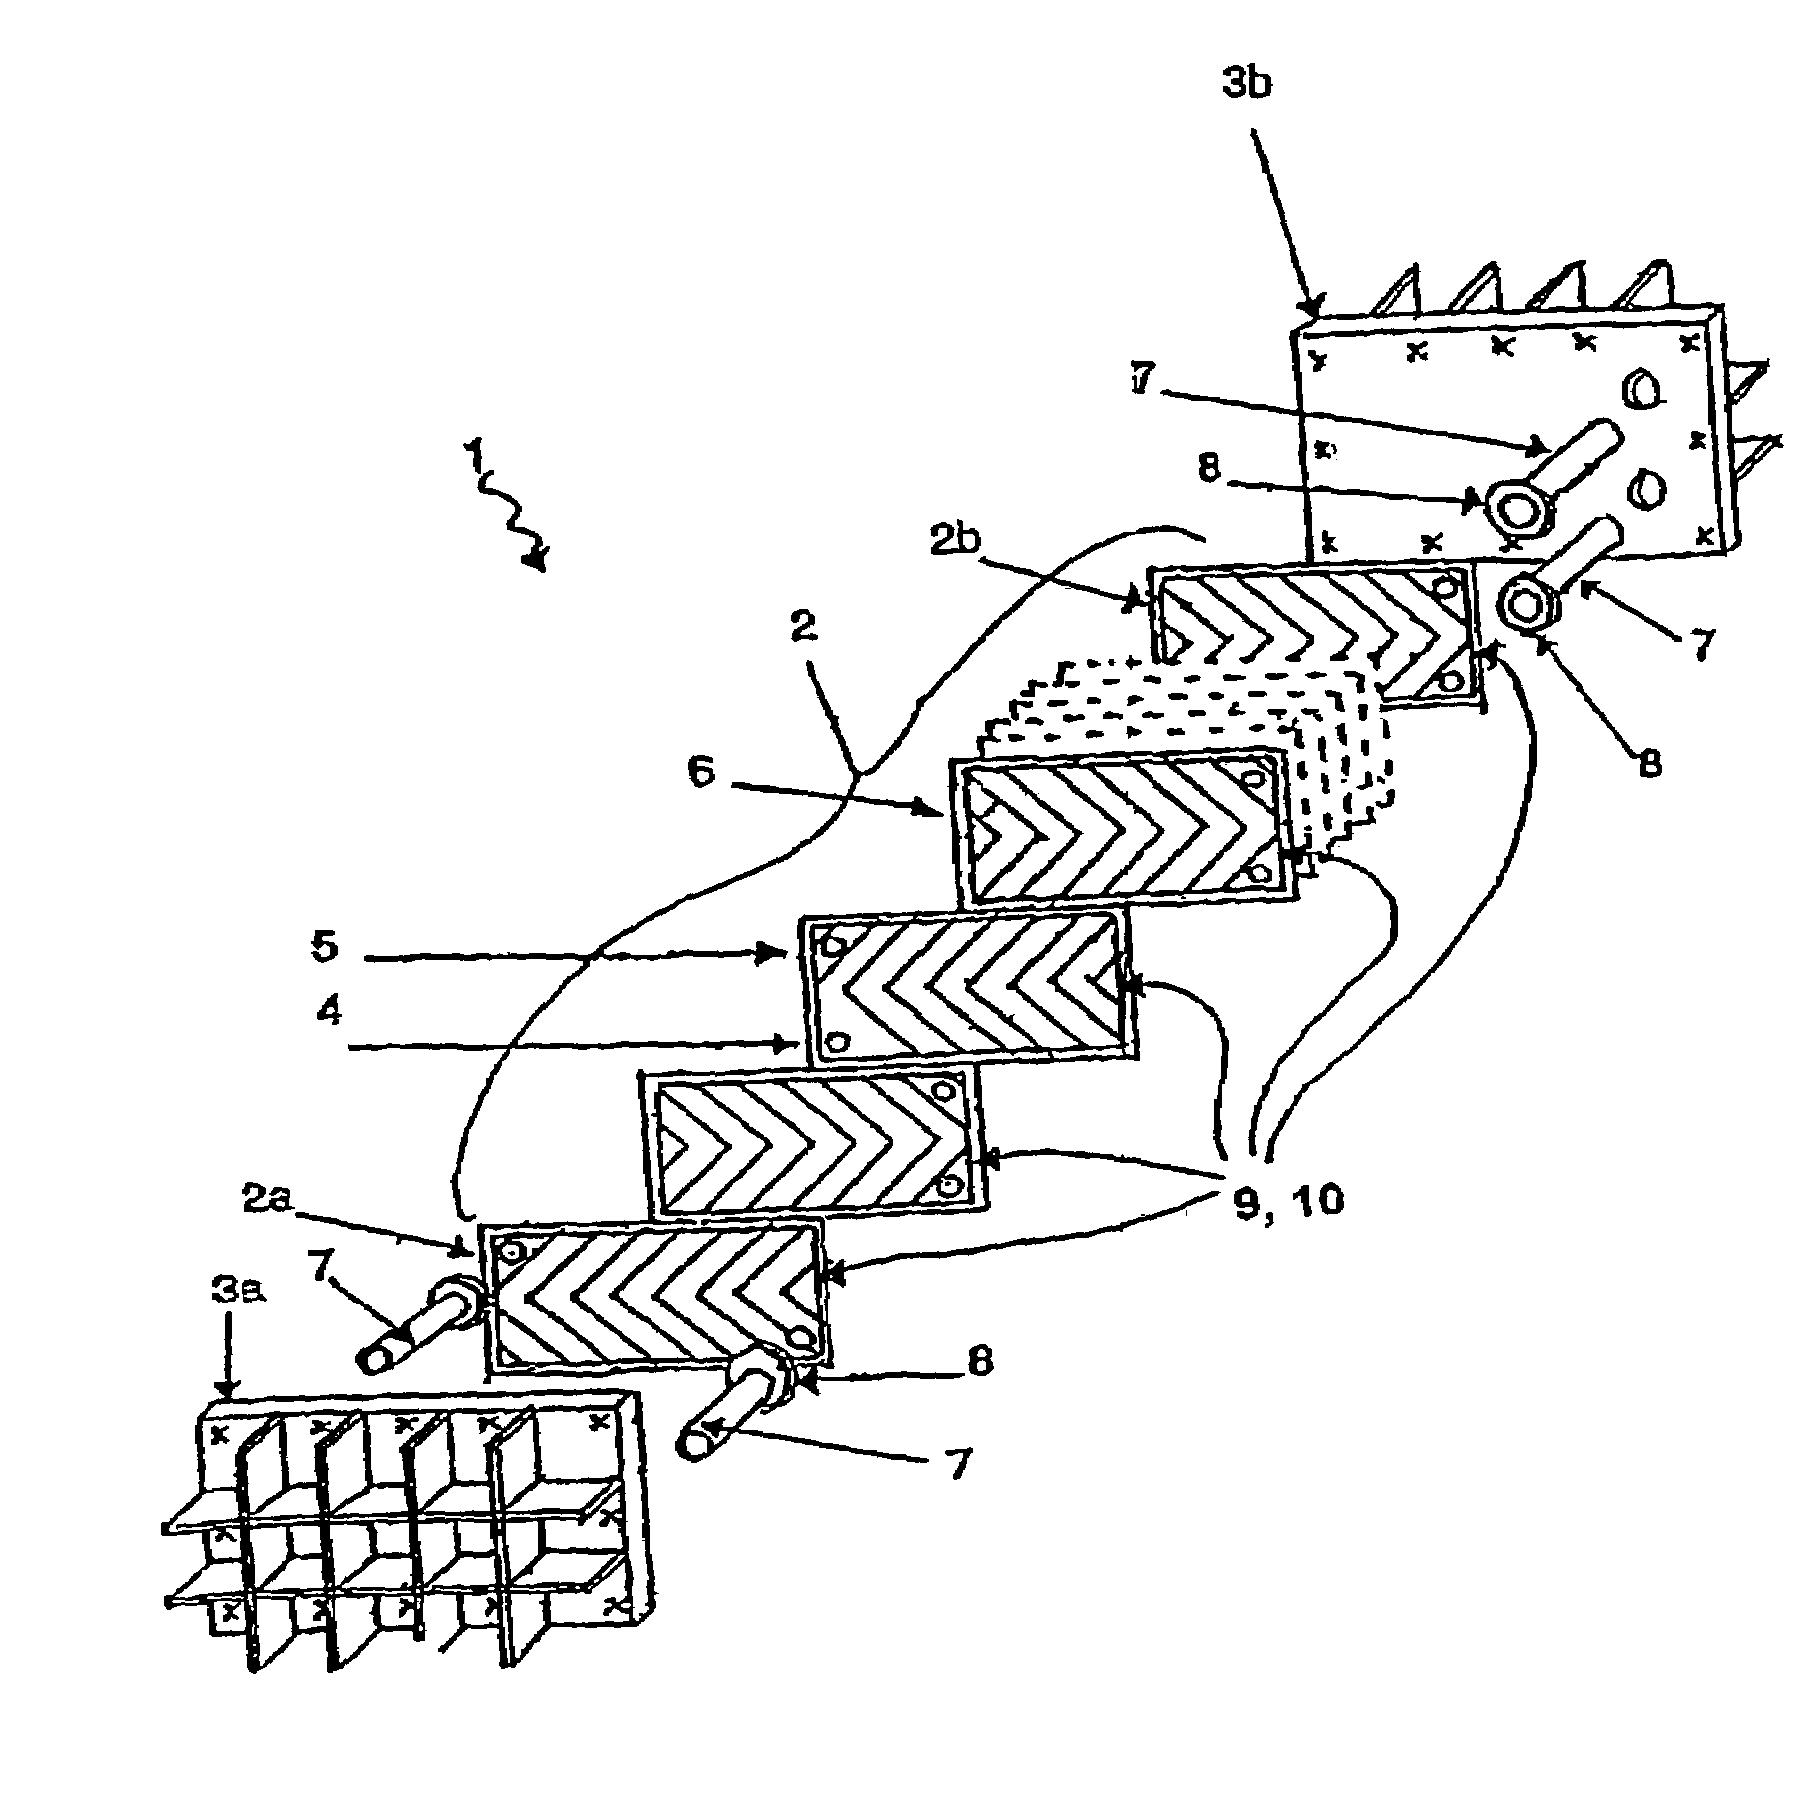 Storage vessel chamber for storing fuels such as hydrogen